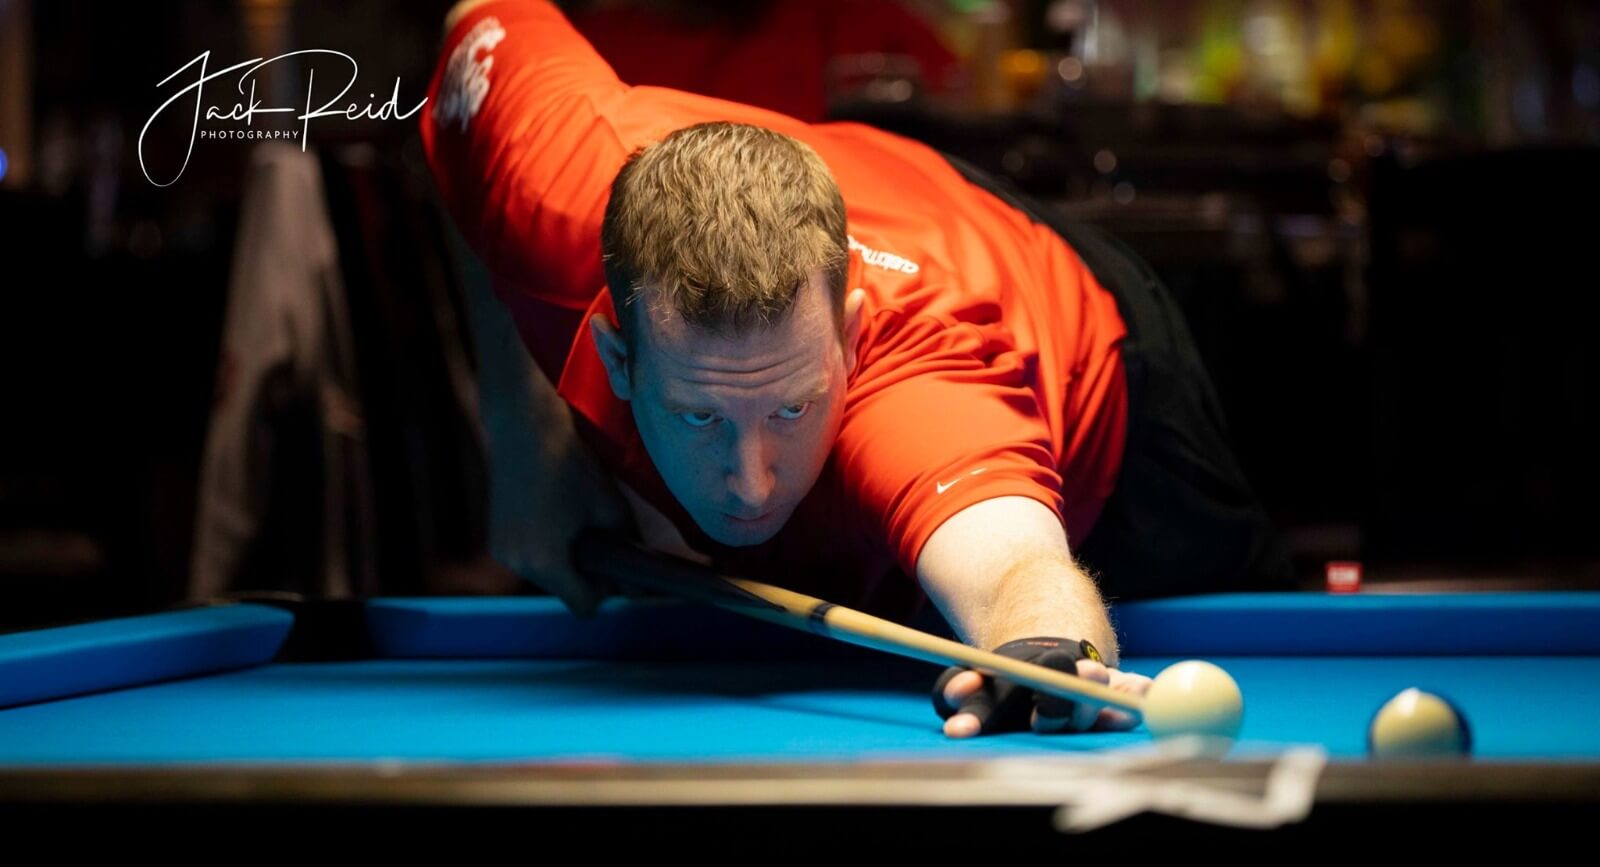 Home - Canadian Cue Sports Academy